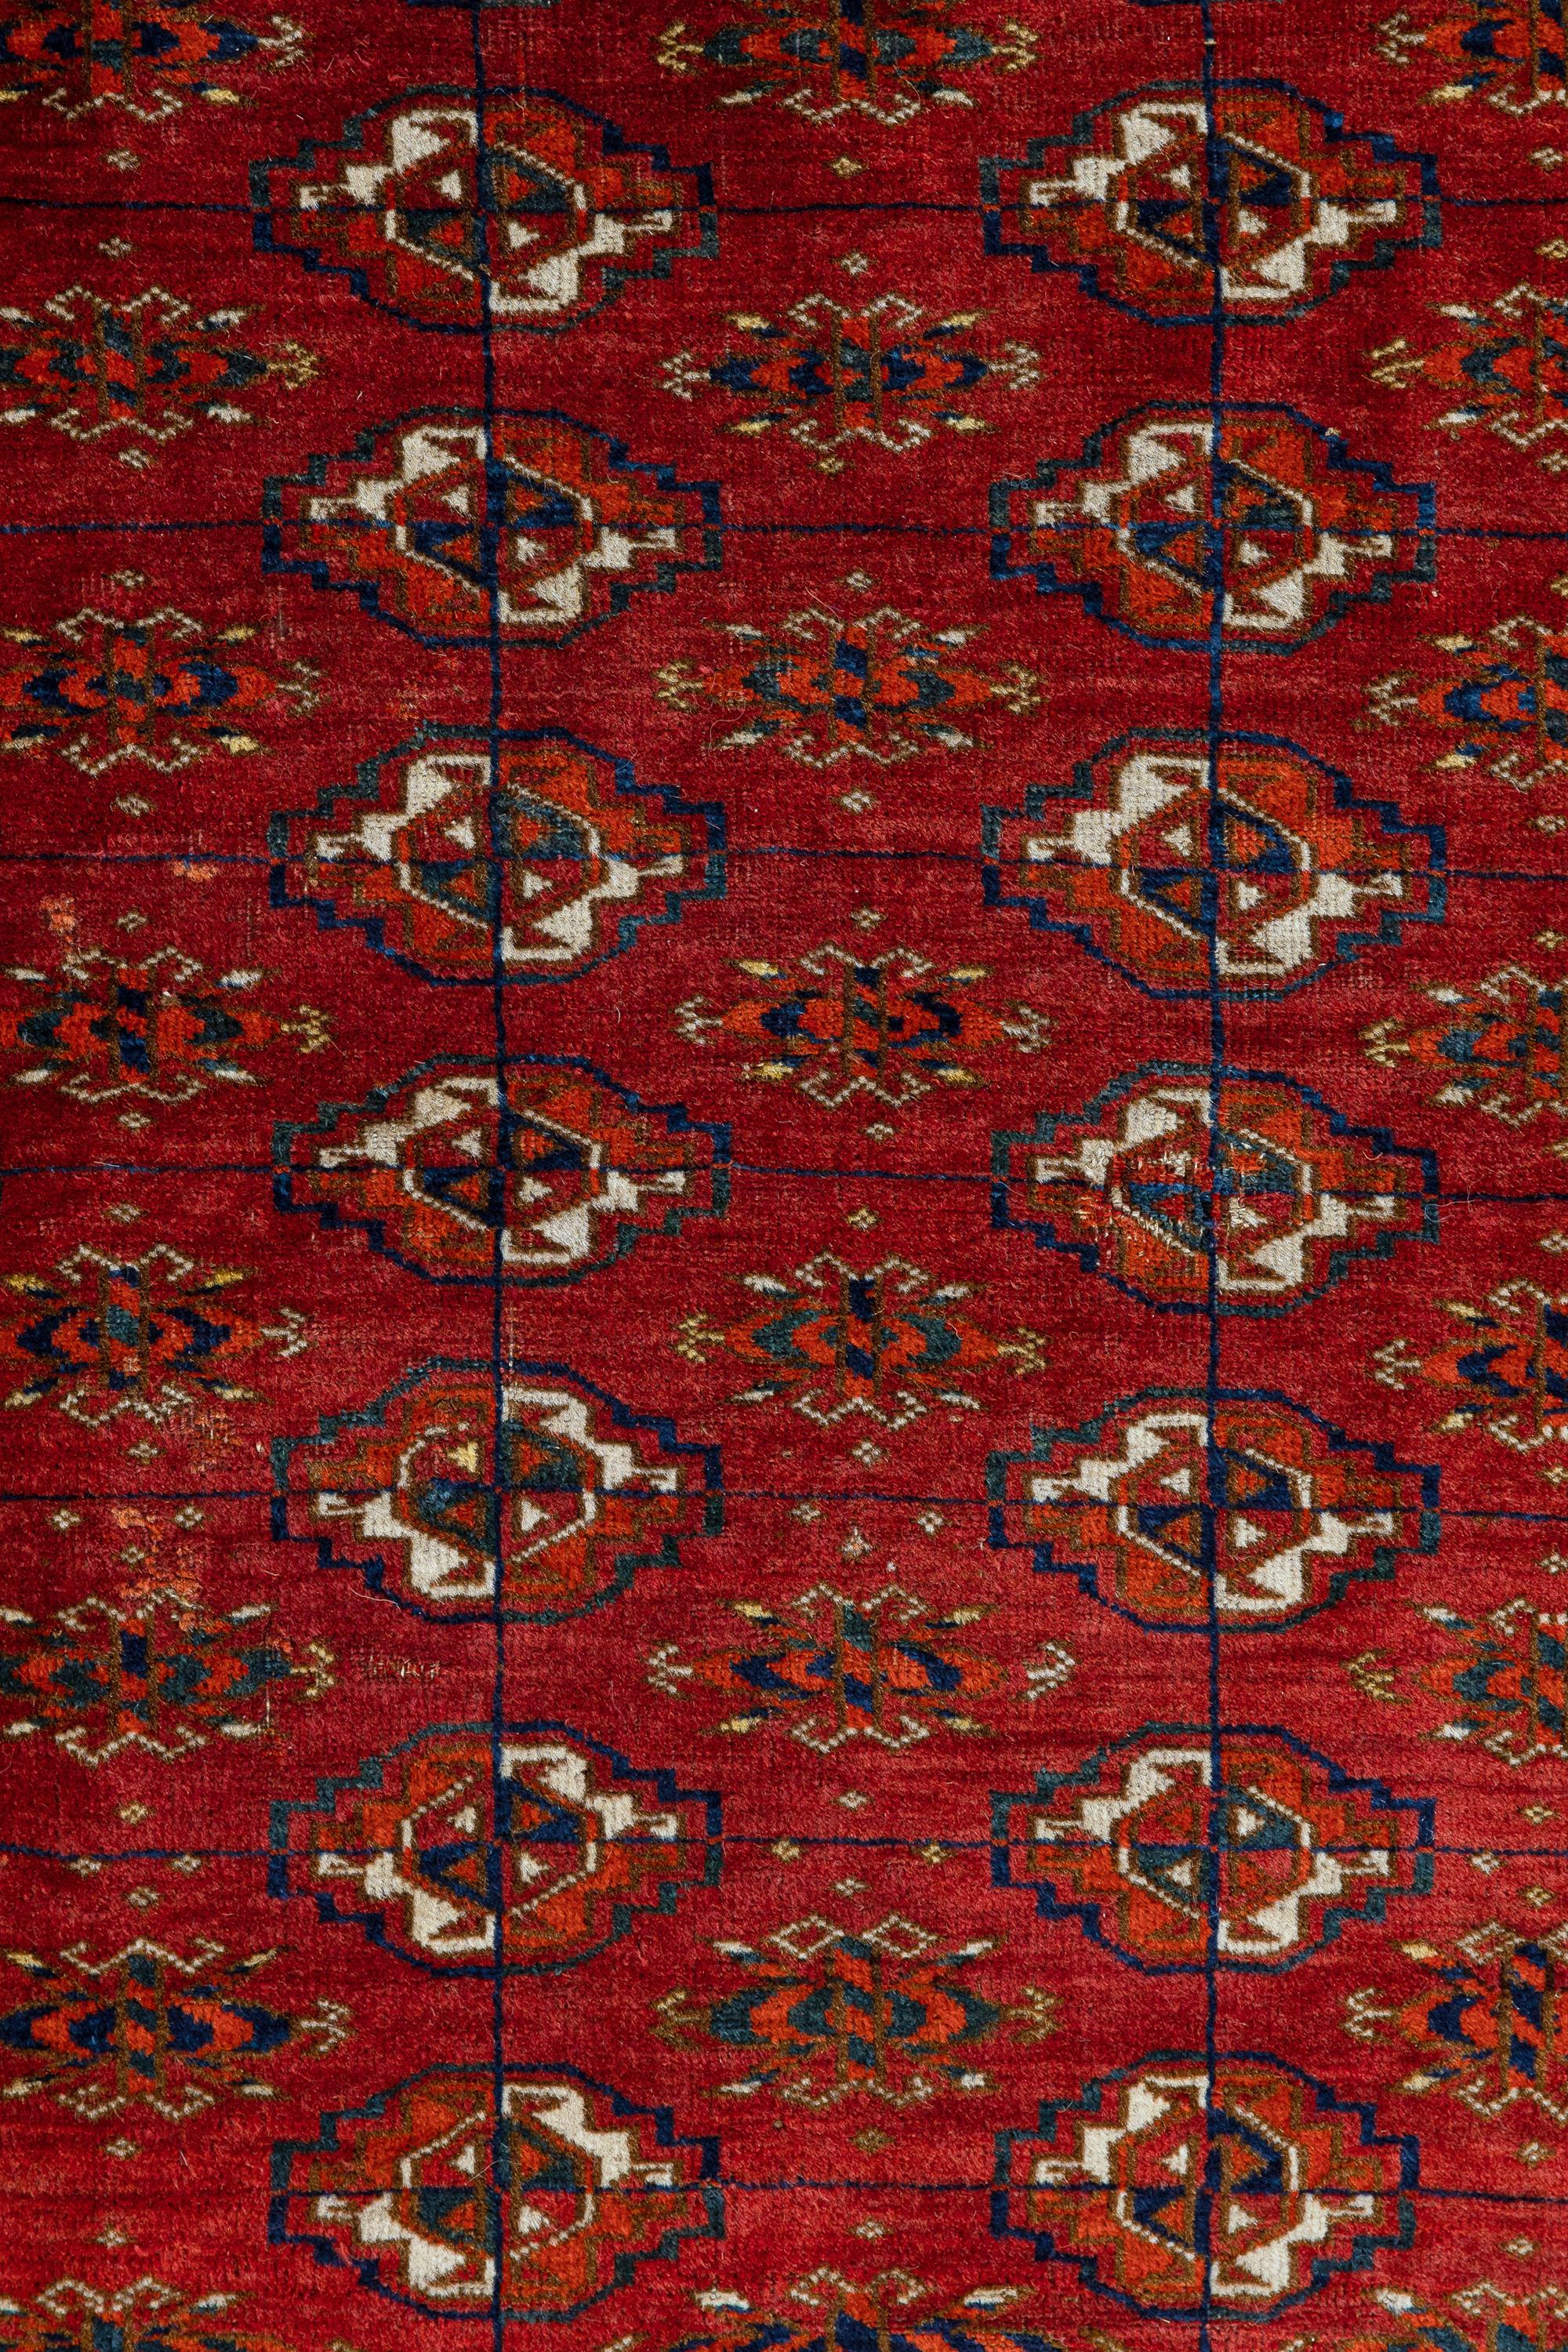 Tekke – Central Asia

Antique Tekke made in Turkmenistan in the middle of the 19th century. Meticulously hand-woven with soft wool and natural dyes, this rug was part of Leigh Marsh’s famous Turkmen rug collection. The unusual border features